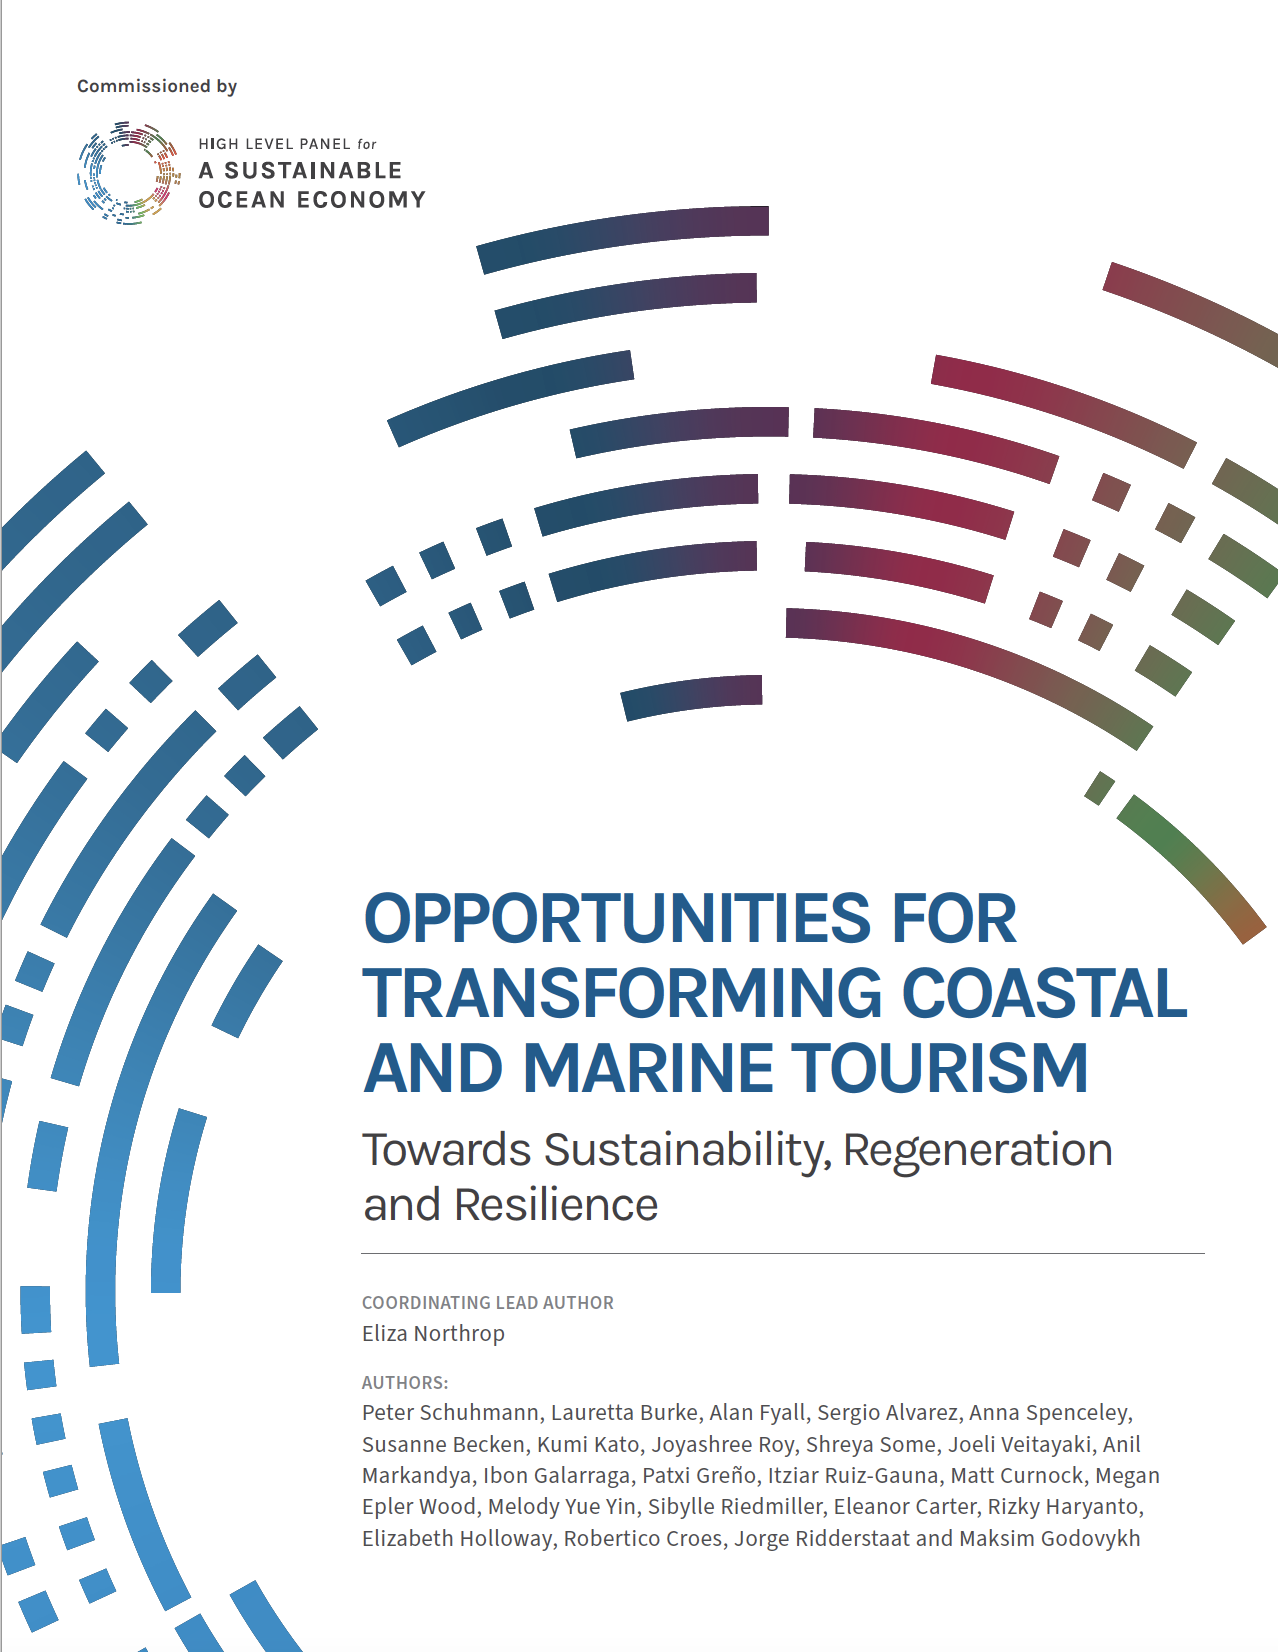 Opportunities for Transforming Coastal and Marine Tourism: Towards Sustainability, Regeneration and Resilience